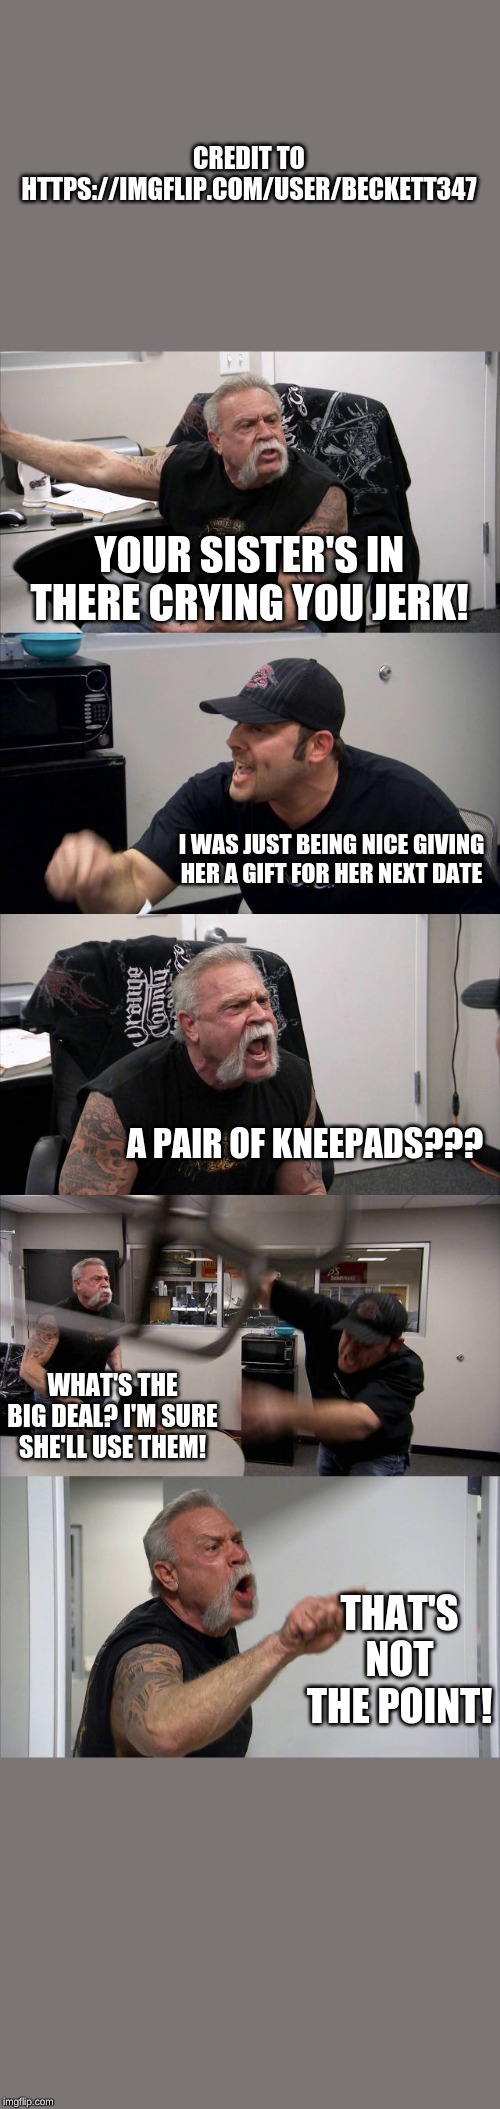 American Chopper Argument | CREDIT TO HTTPS://IMGFLIP.COM/USER/BECKETT347; YOUR SISTER'S IN THERE CRYING YOU JERK! I WAS JUST BEING NICE GIVING HER A GIFT FOR HER NEXT DATE; A PAIR OF KNEEPADS??? WHAT'S THE BIG DEAL? I'M SURE SHE'LL USE THEM! THAT'S NOT THE POINT! | image tagged in memes,american chopper argument | made w/ Imgflip meme maker